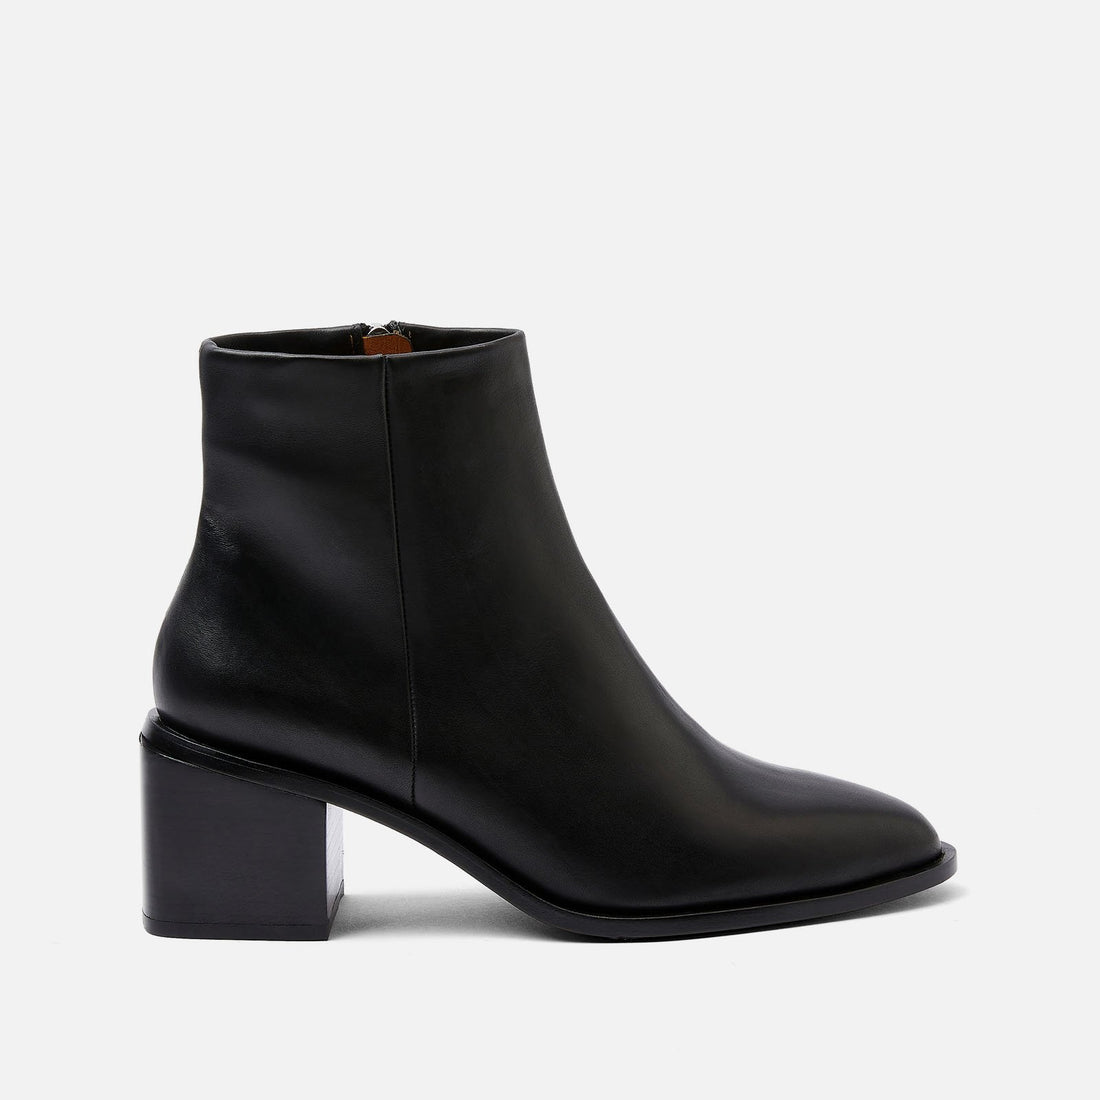 clergerie - XENIA ANKLE BOOTS, BLACK